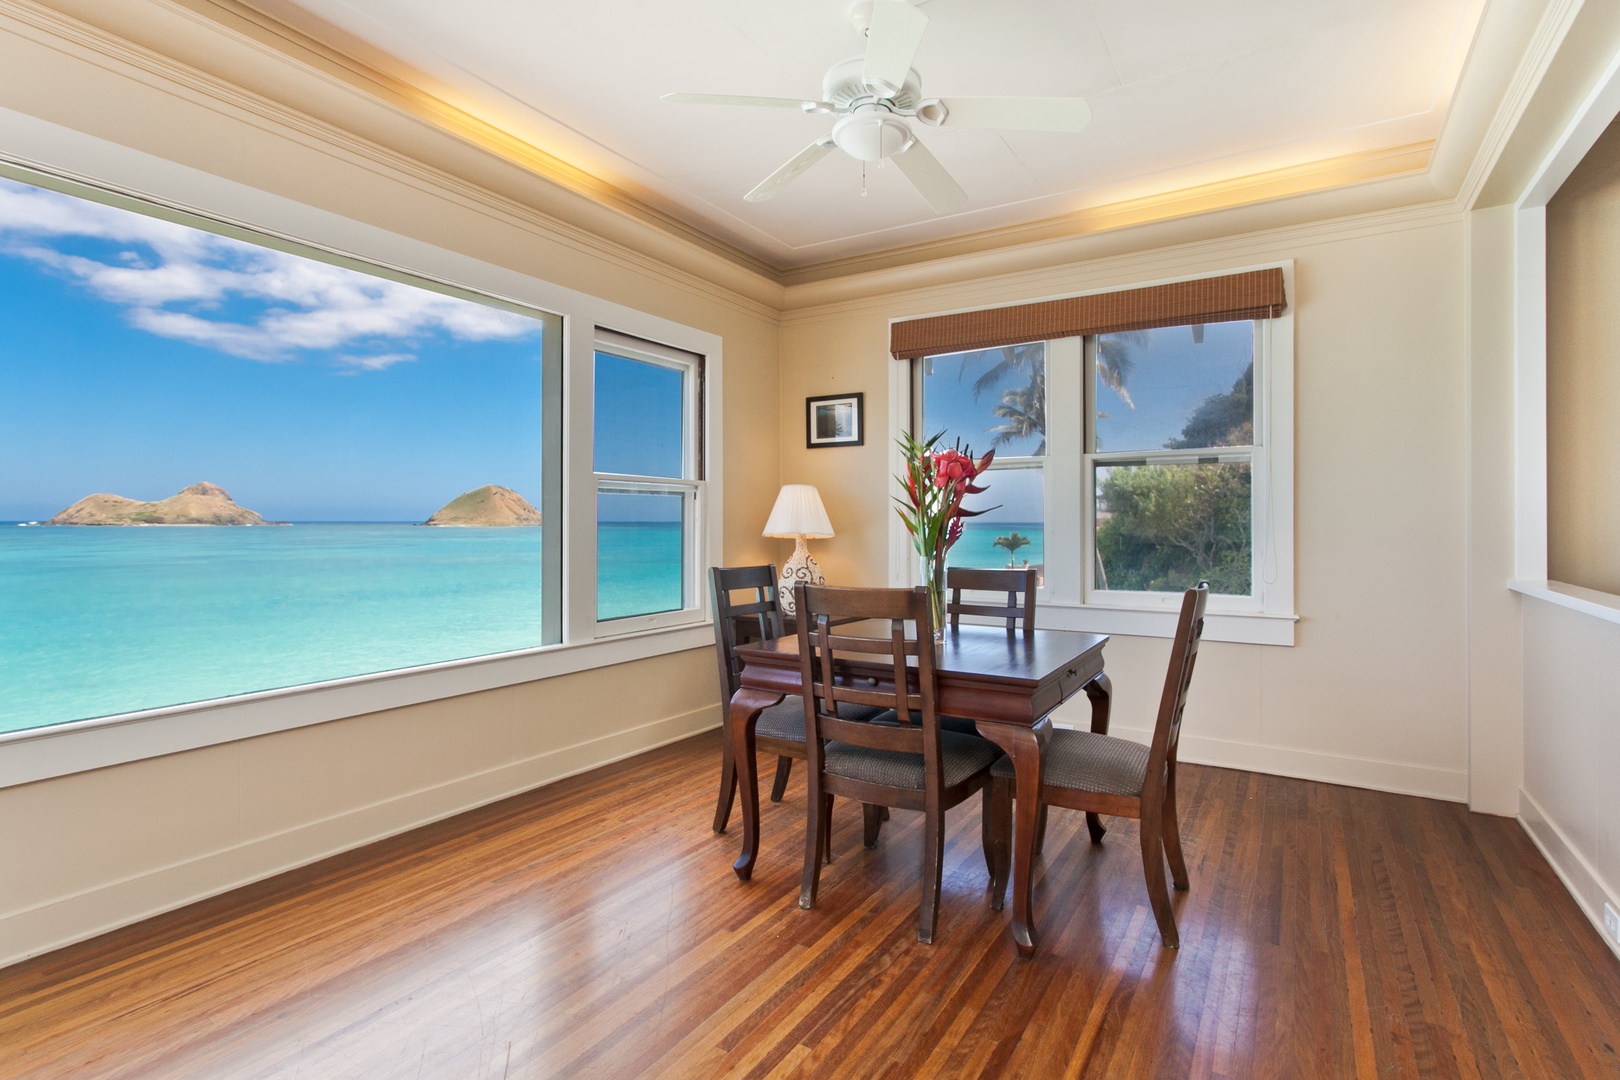 Kailua Vacation Rentals, Lanikai Village* - Hale Mahina Lanikai: The breakfast nook is a perfect spot for morning coffee or a light meal.